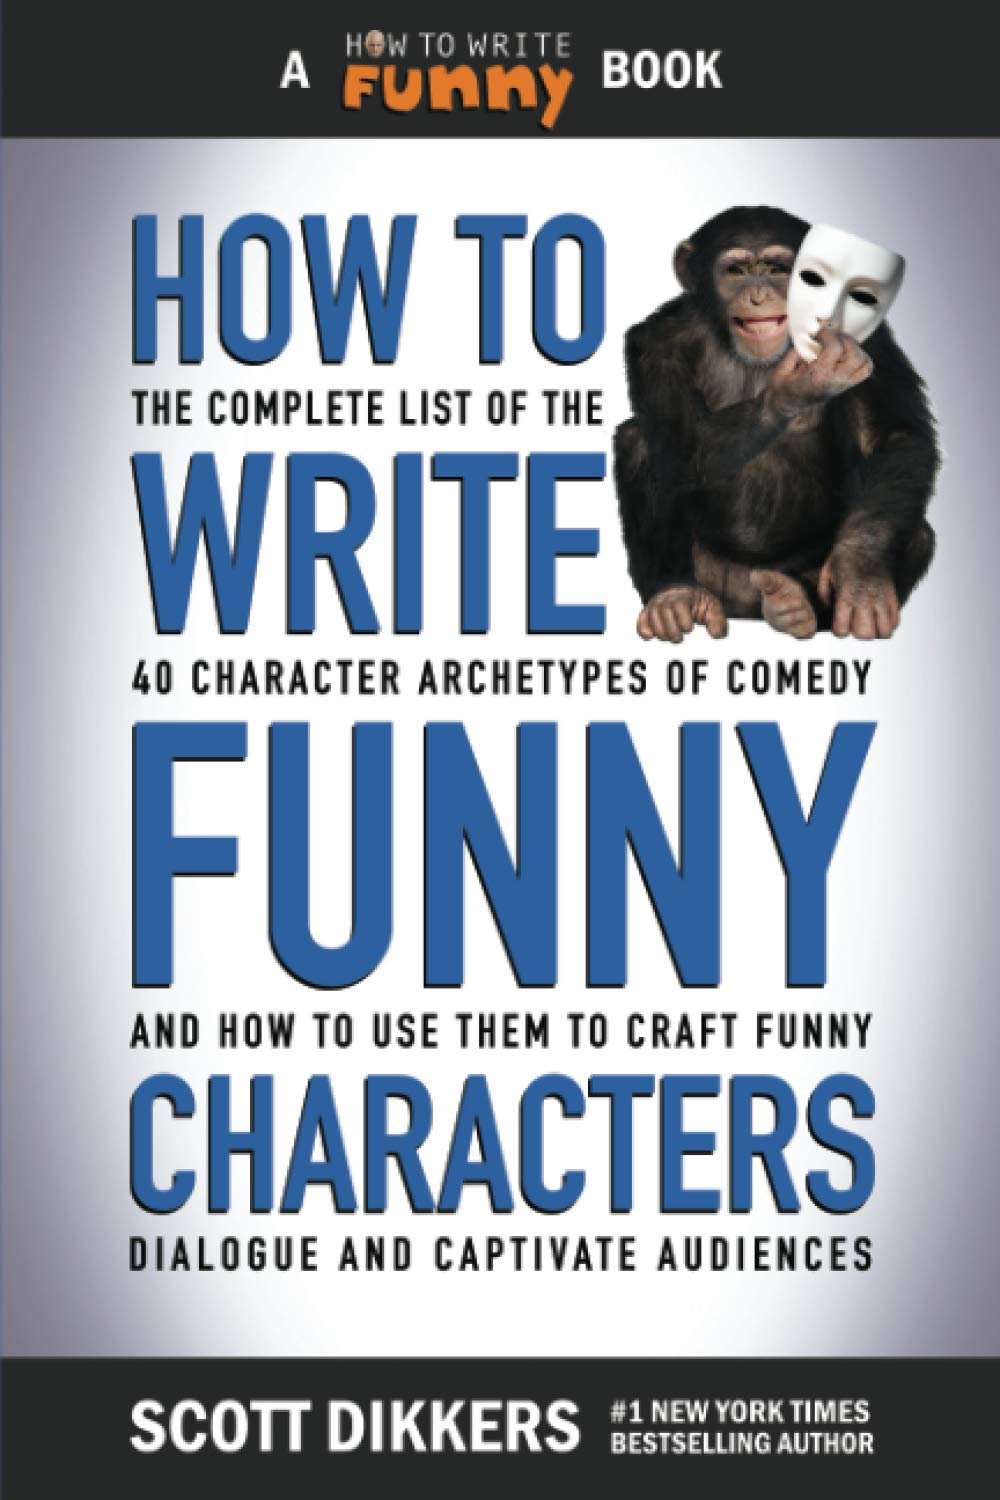 How To Write Funny Characters by Scott Dikkers